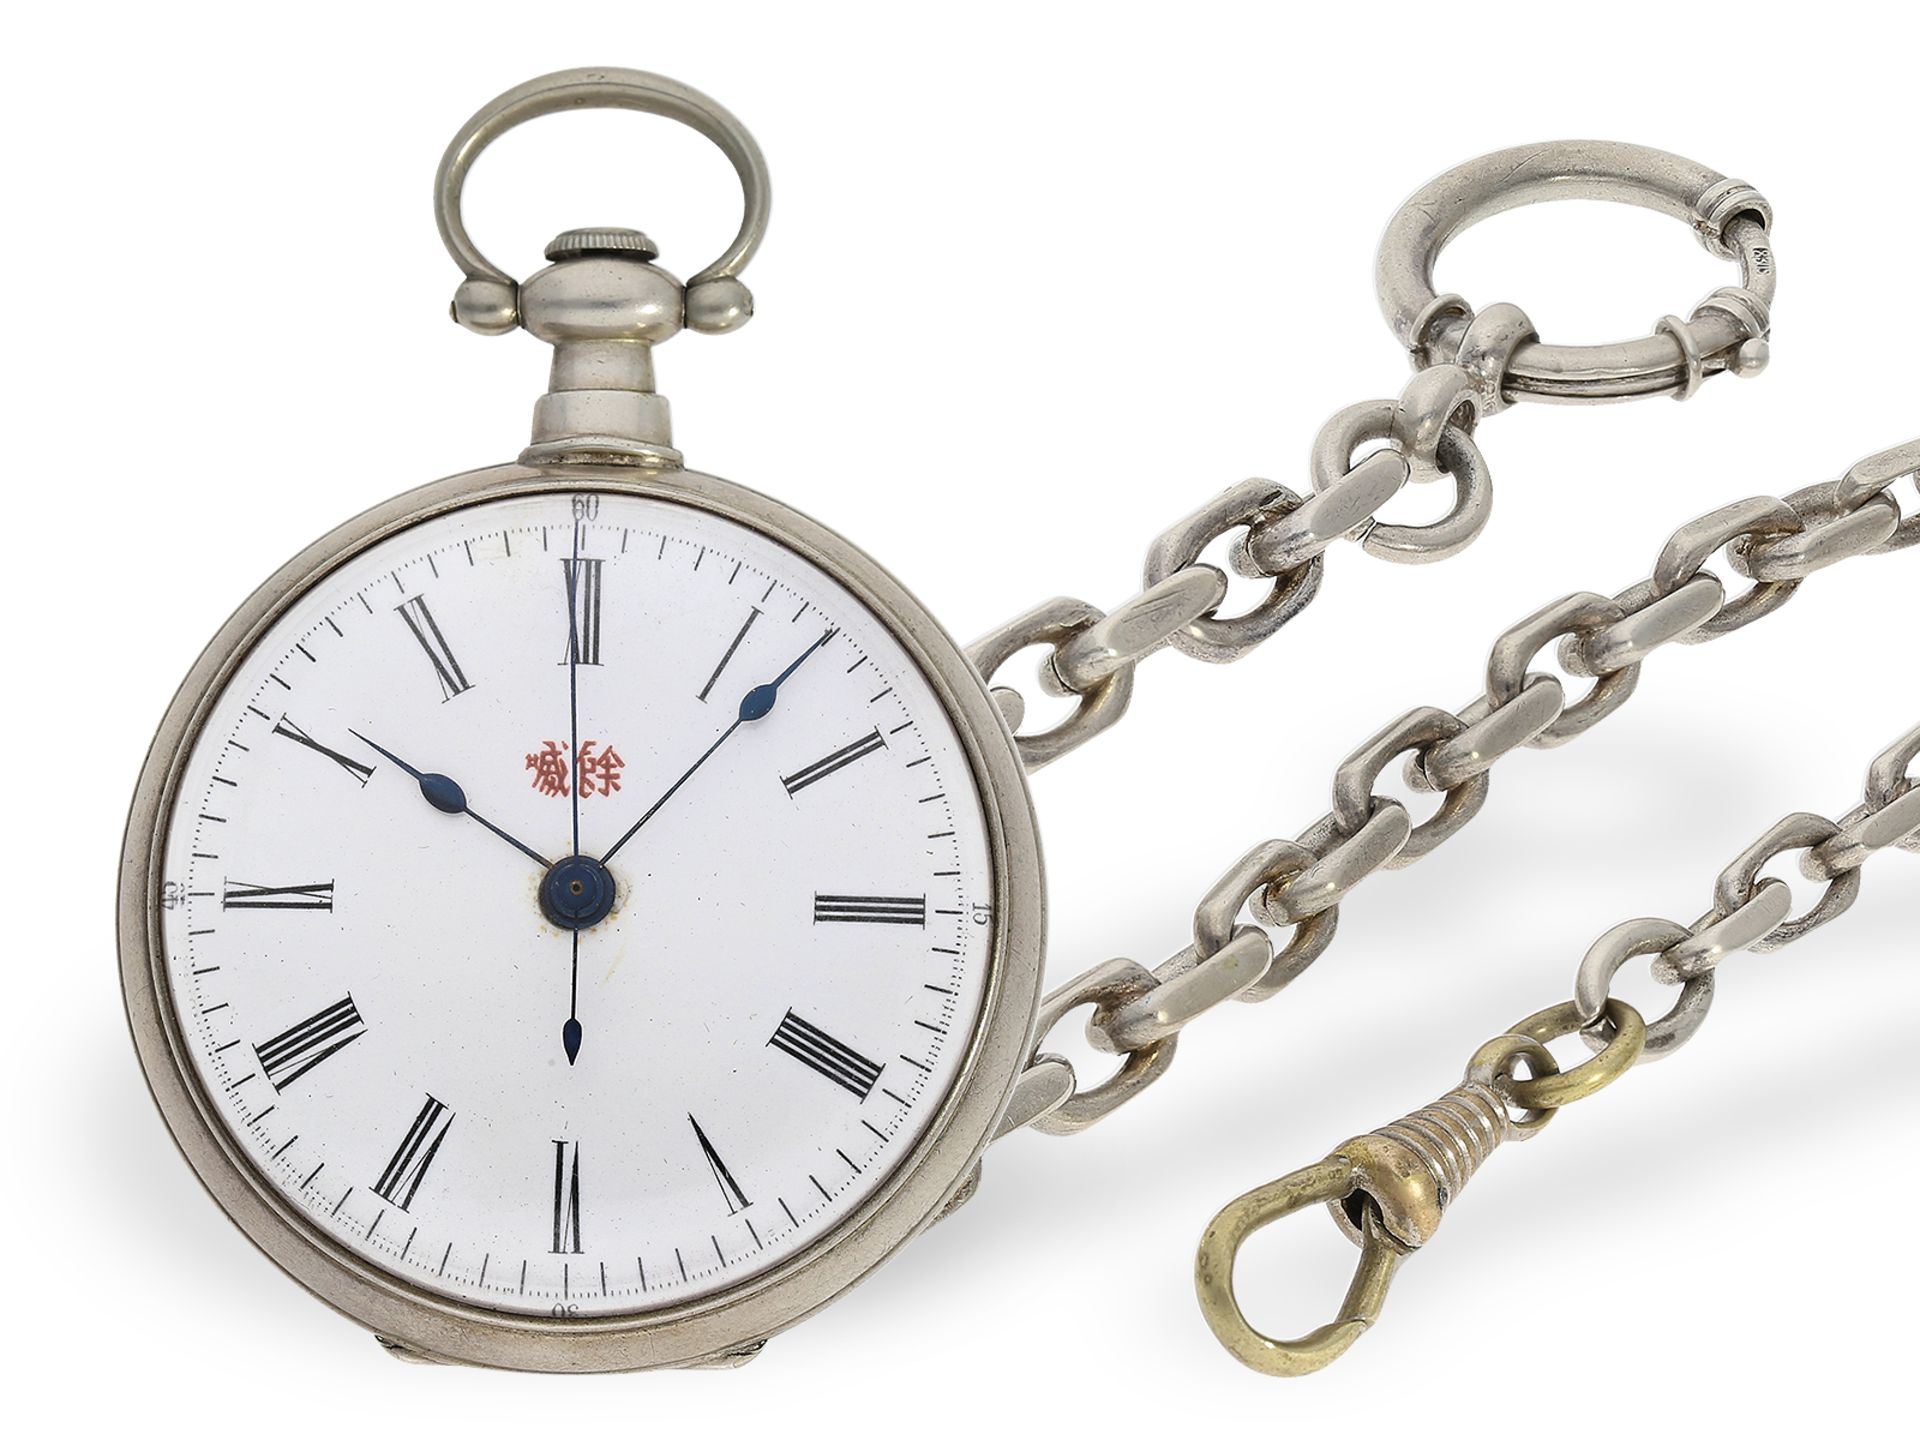 Pocket watch: fine Fleurier pocket watch with centre seconds, Bovet for the Chinese market, ca. 1850